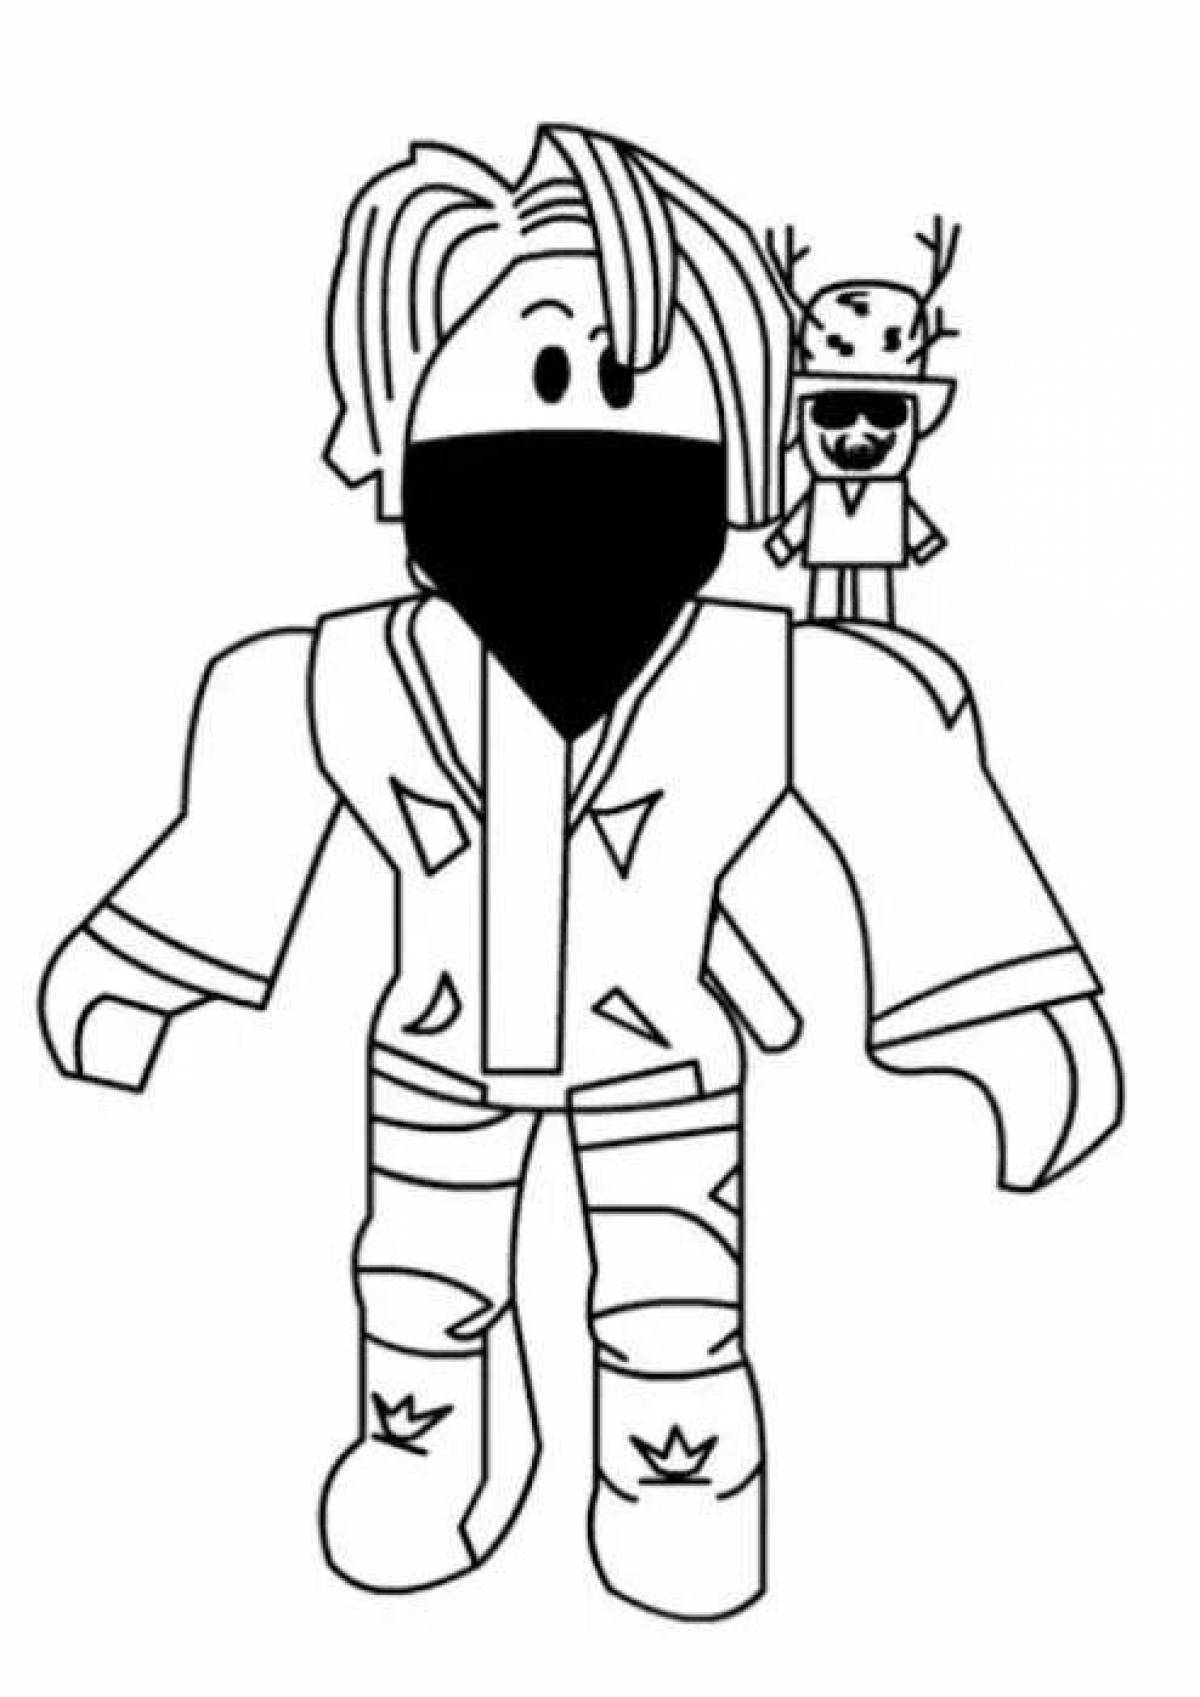 Roblox adorable characters coloring page